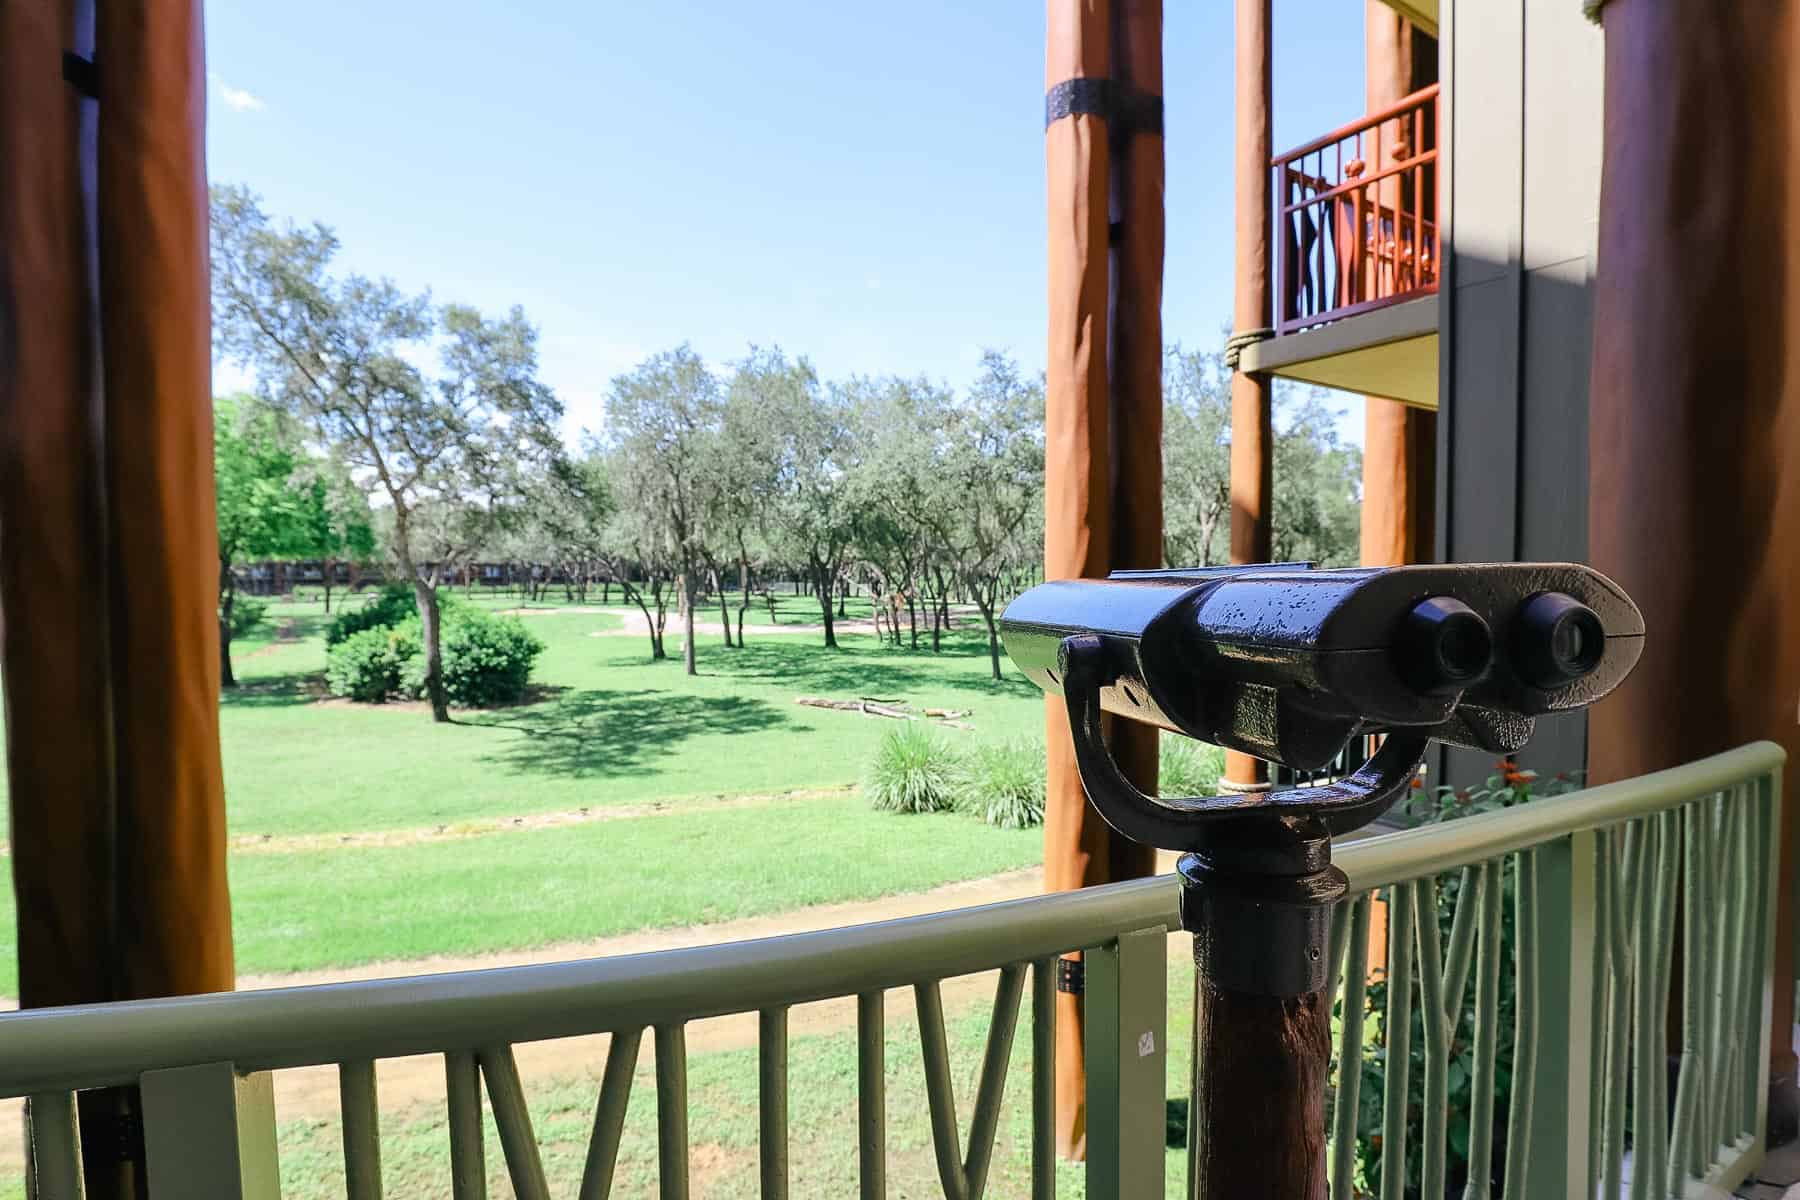 a pair of binoculars to view the animals with a giraffe in the distance 